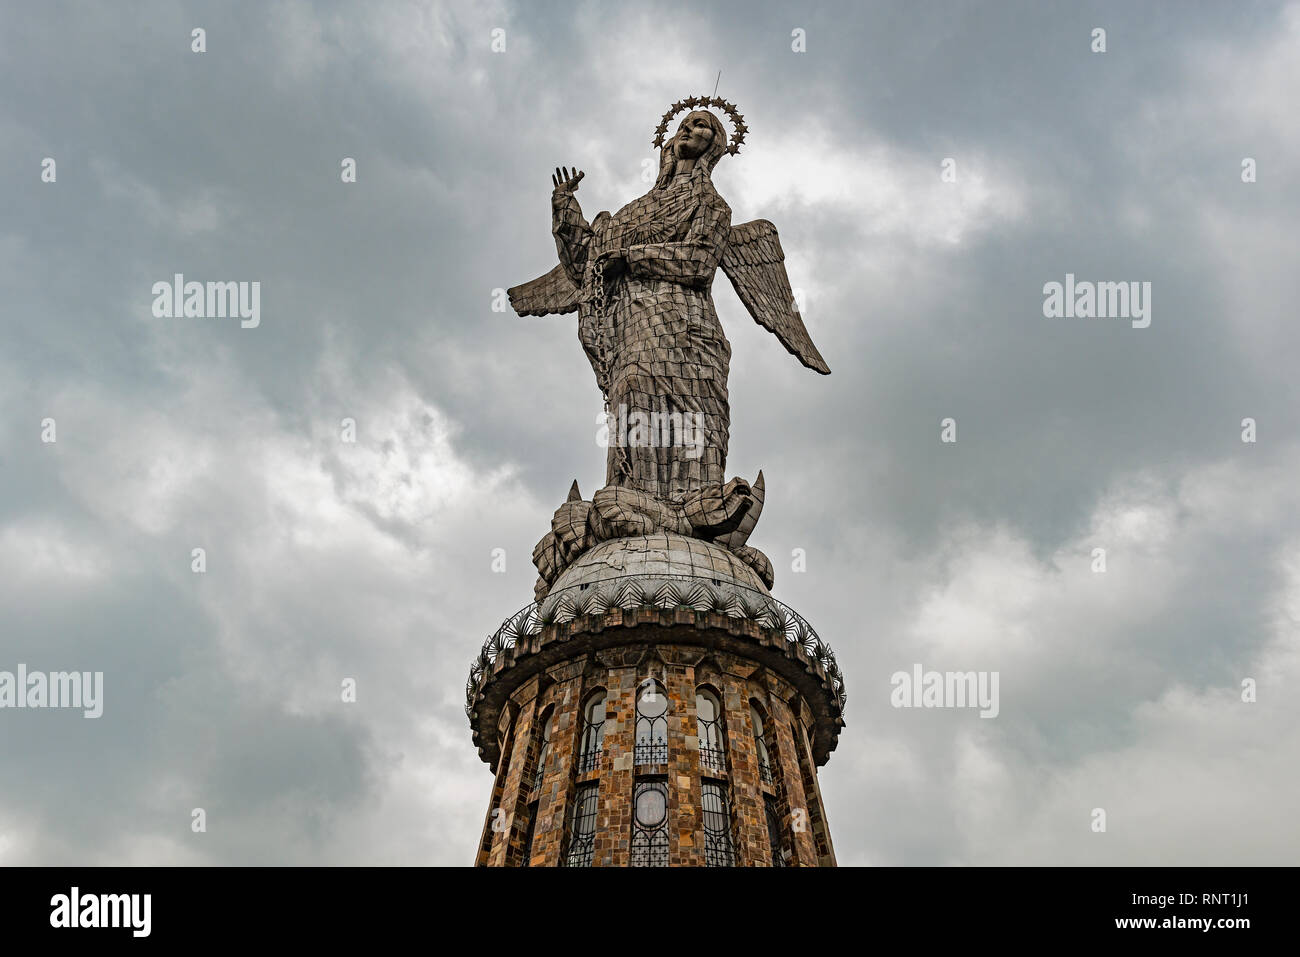 The Virgin of Quito, winged virgin or apocalyptic virgin with observation tower on the Panecillo Hill of Quito, Ecuador. Stock Photo